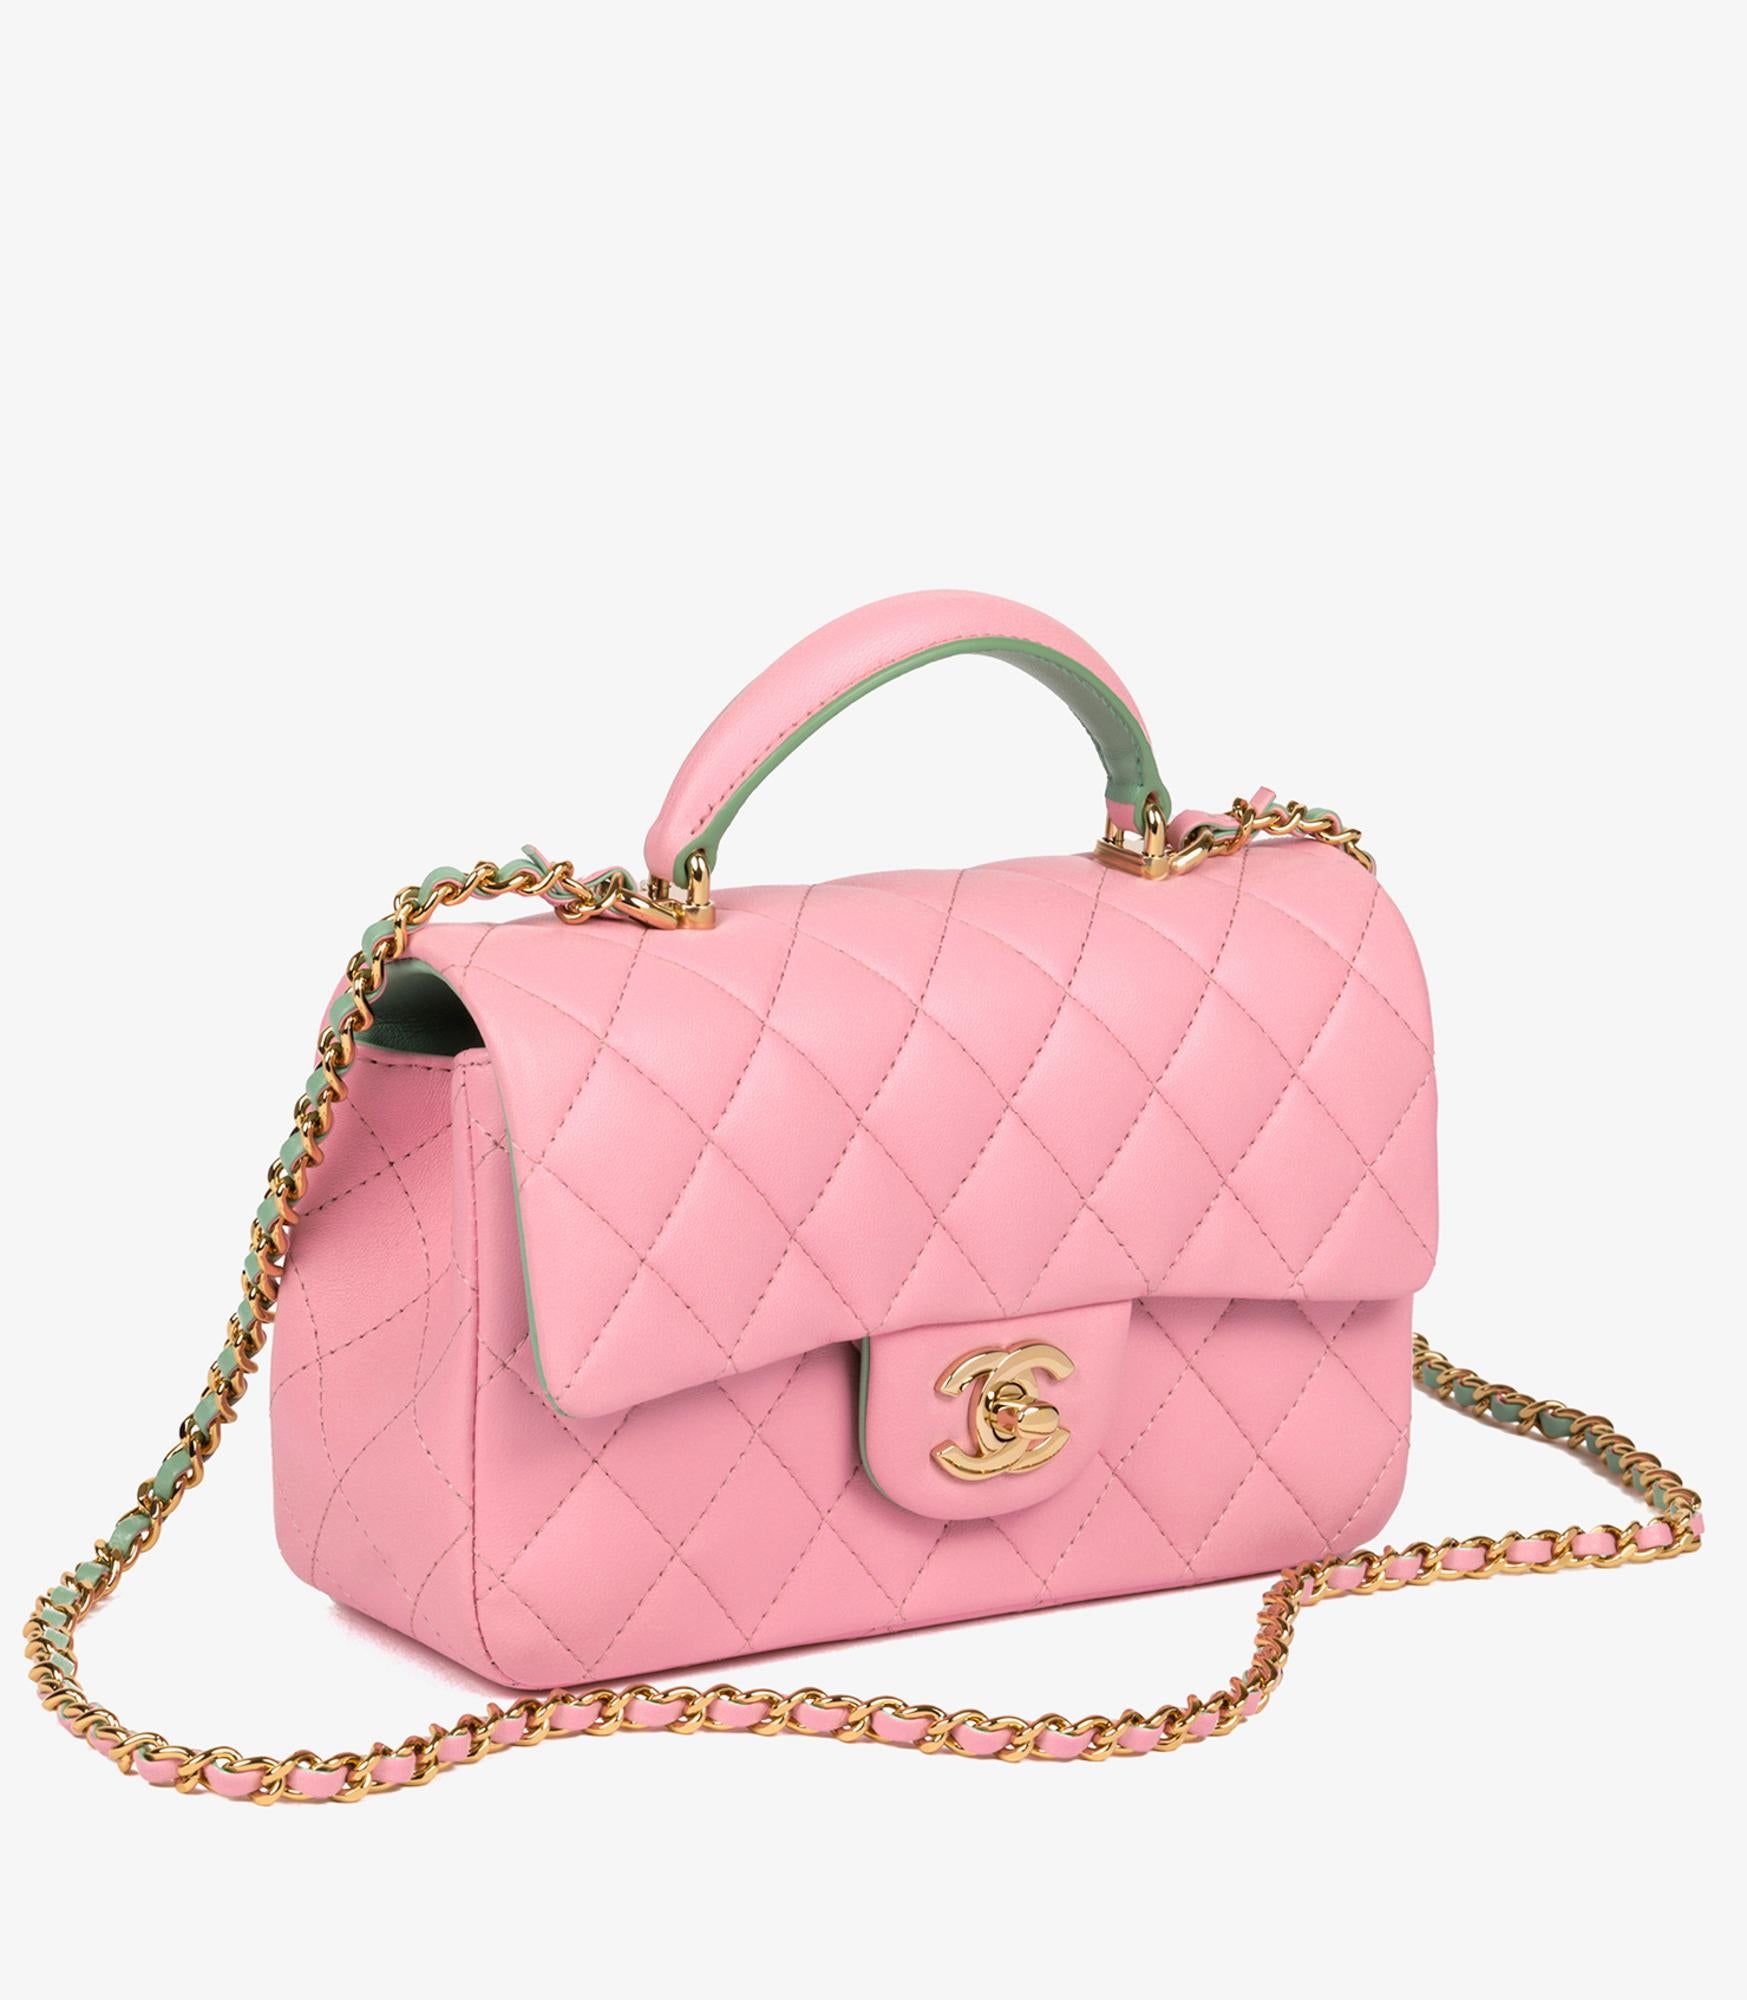 pink and green chanel bag